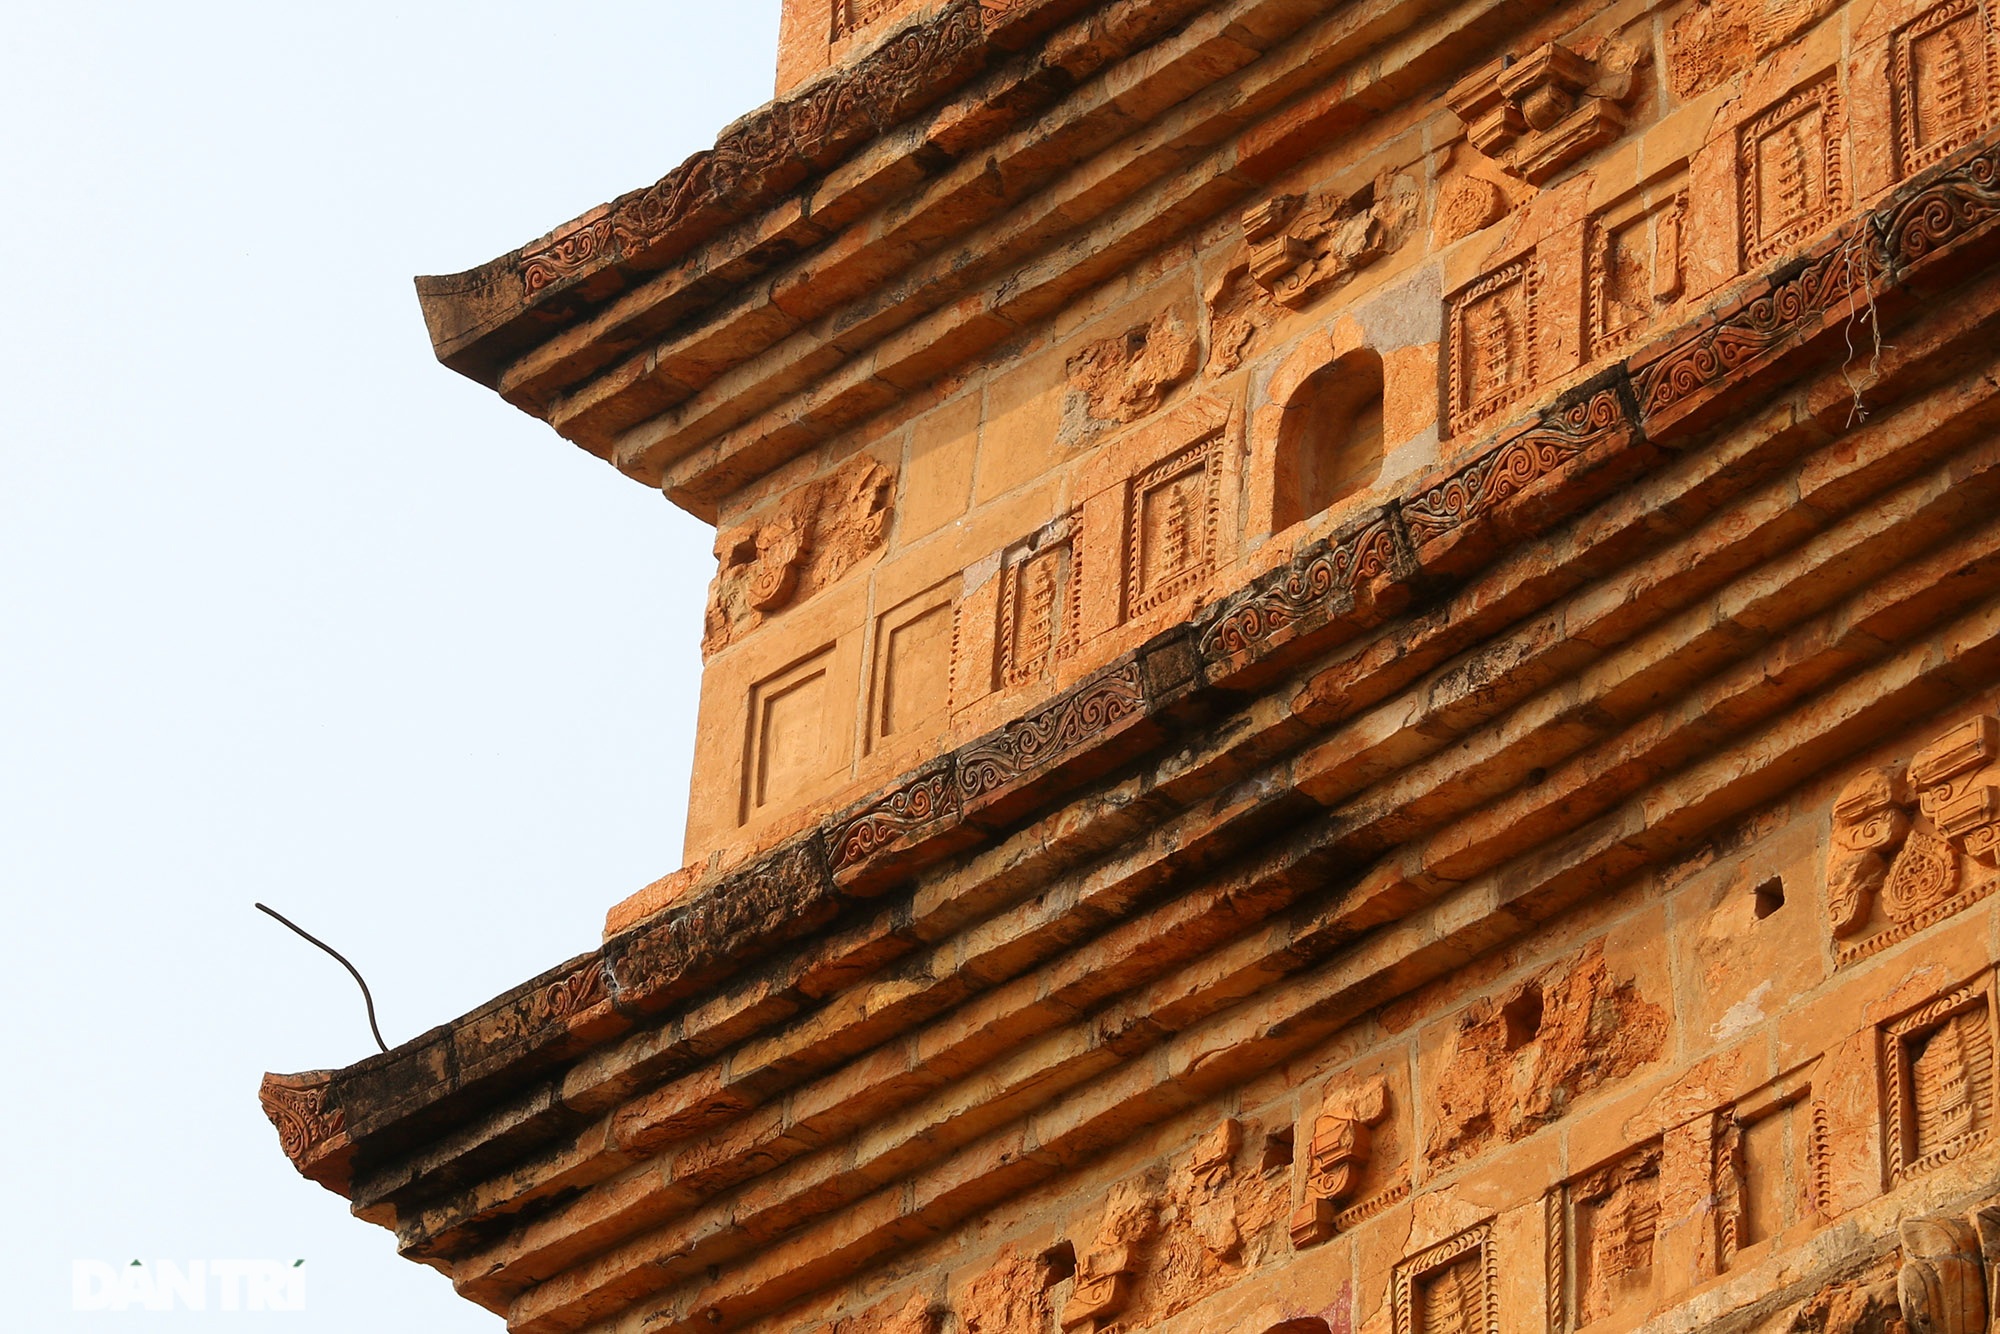 The highest remaining terracotta tower in Vietnam remains today - 9